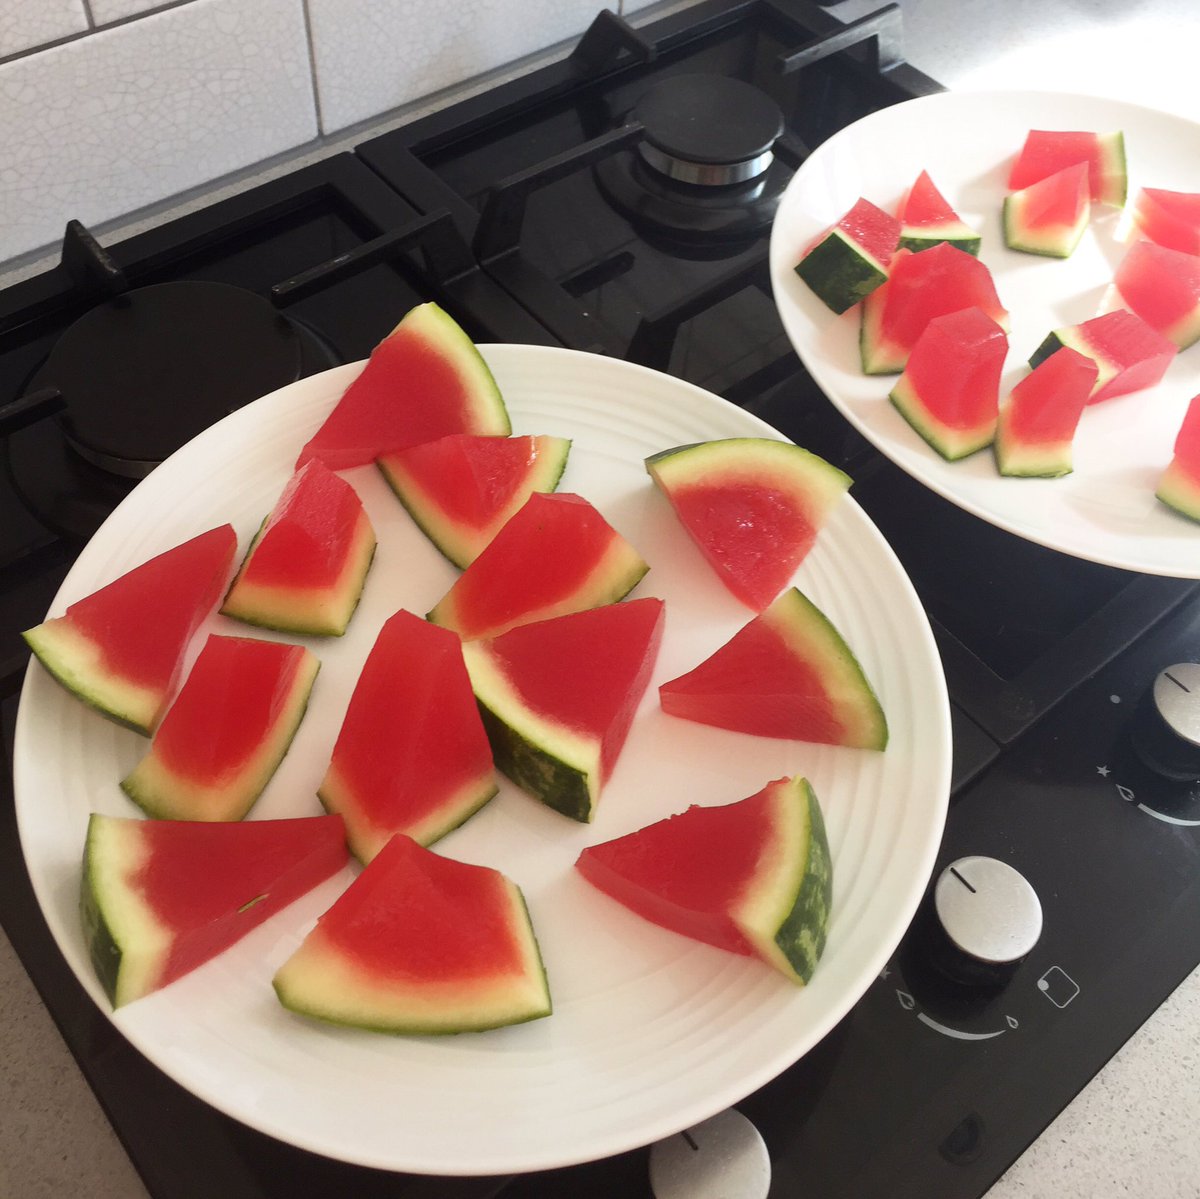 My drunken vodka jelly watermelon making turned out AWESOME ???????????????? https://t.co/c0QfWYIEJ8